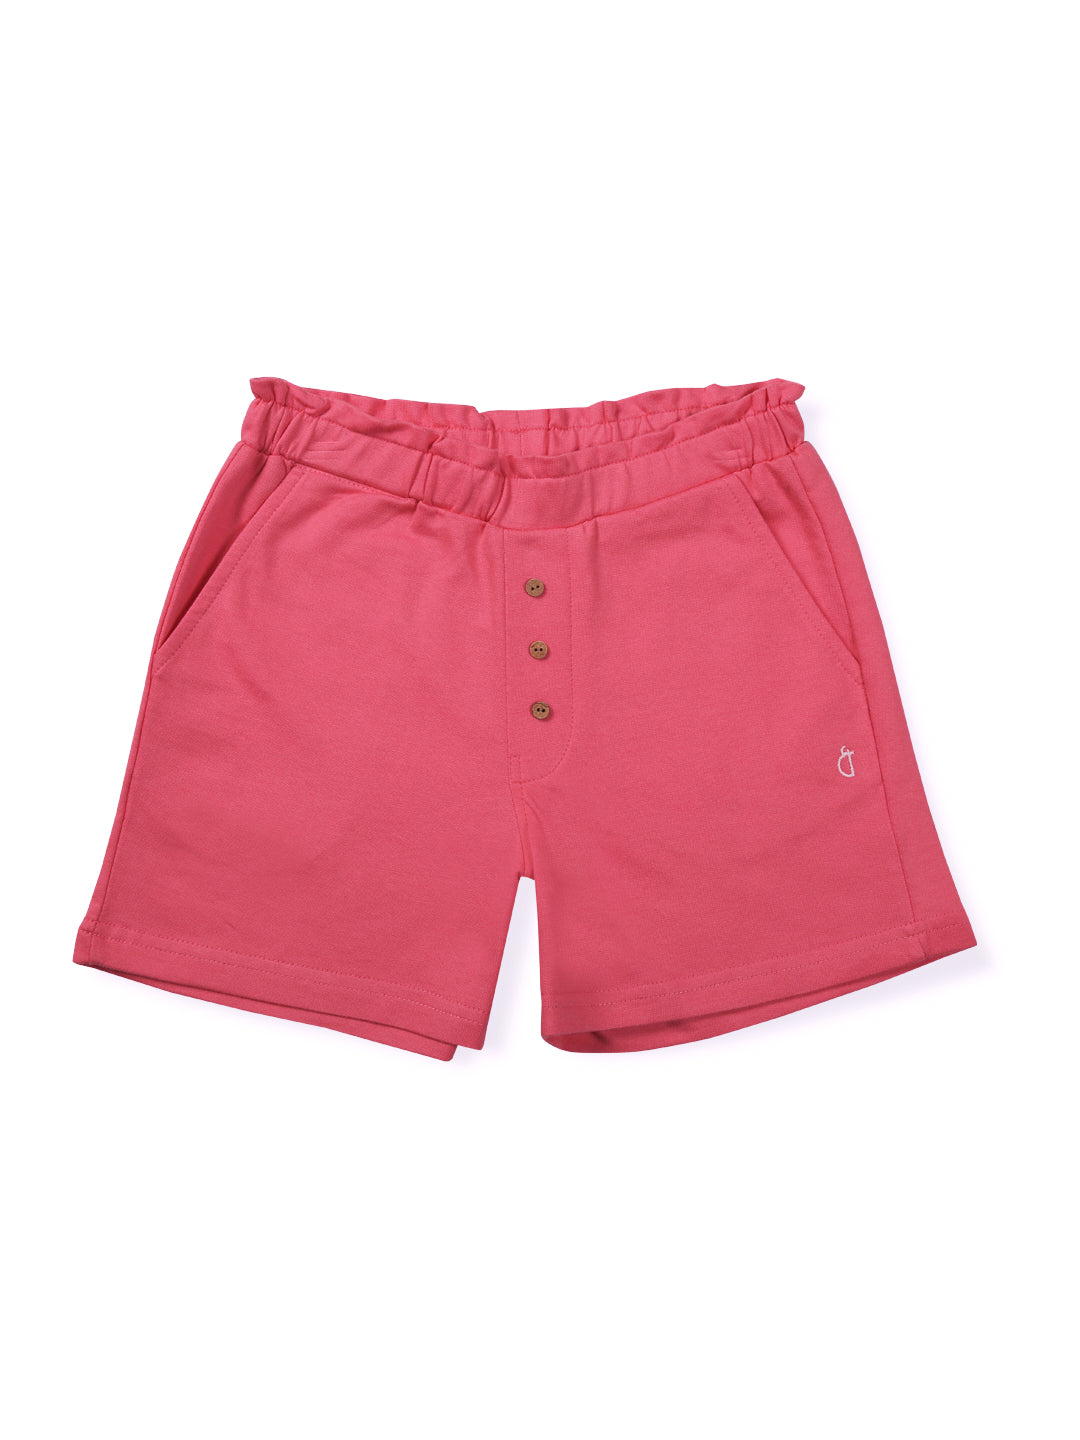 Girls Pink Cotton Solid Shorts